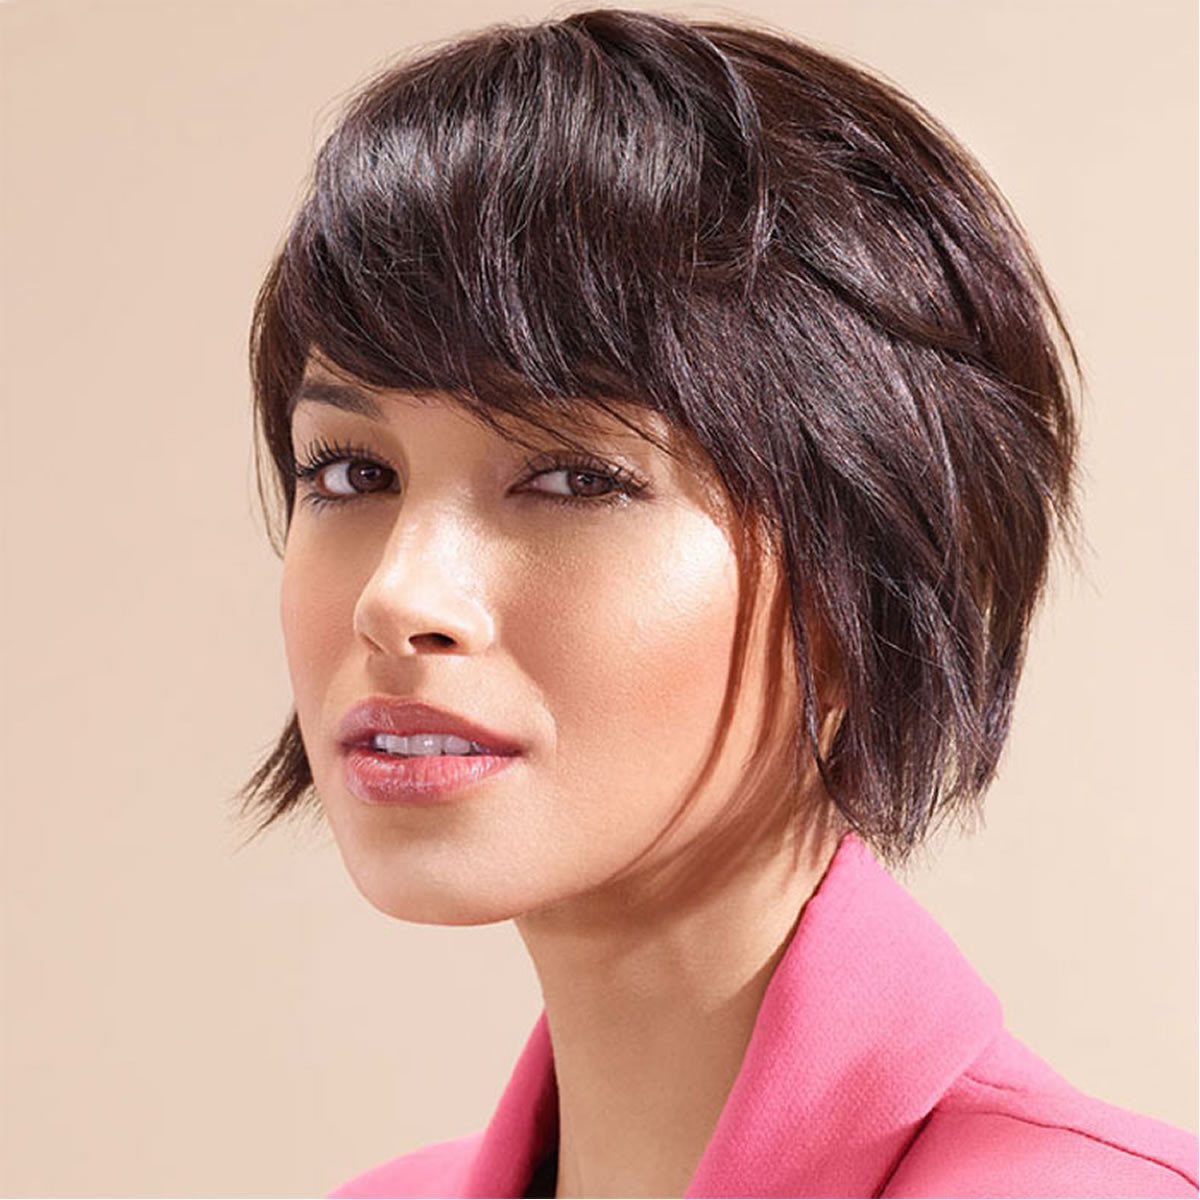 Hairstyles For Short Bob
 The Best 33 Short Bob Haircuts – 2019 Short Hairstyles for